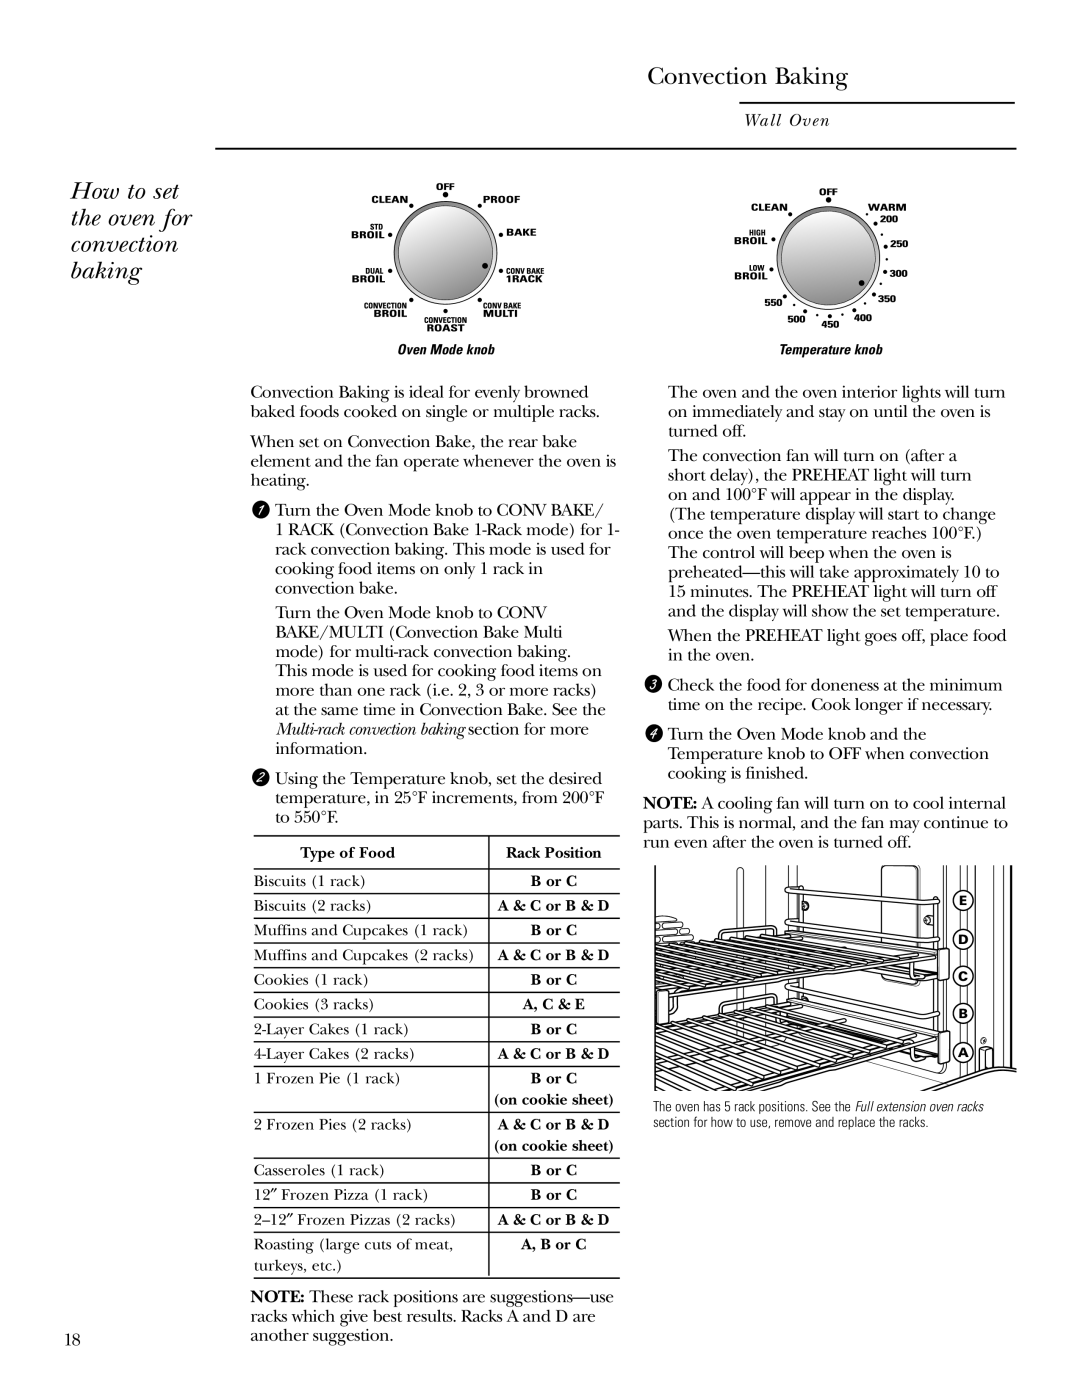 GE ZET2P, ZET2S, ZET1S, ZET1P owner manual How to set the oven for convection baking, Convection Baking 